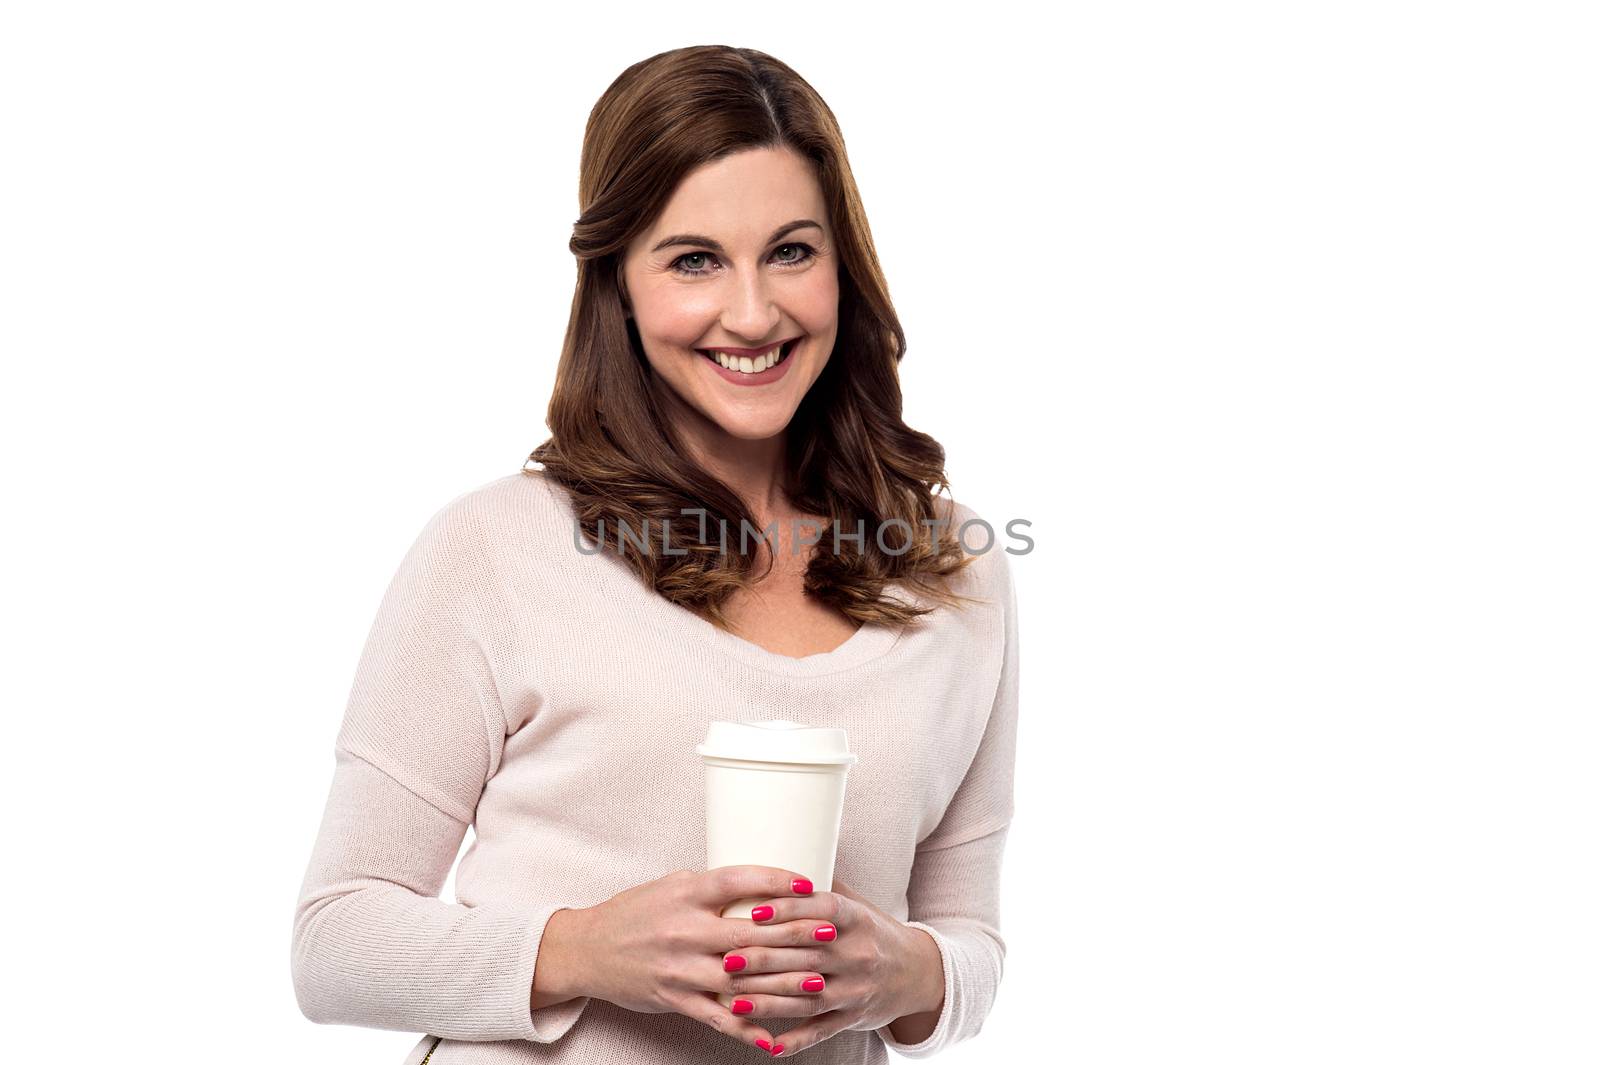 Smiling woman posing with disposable cup